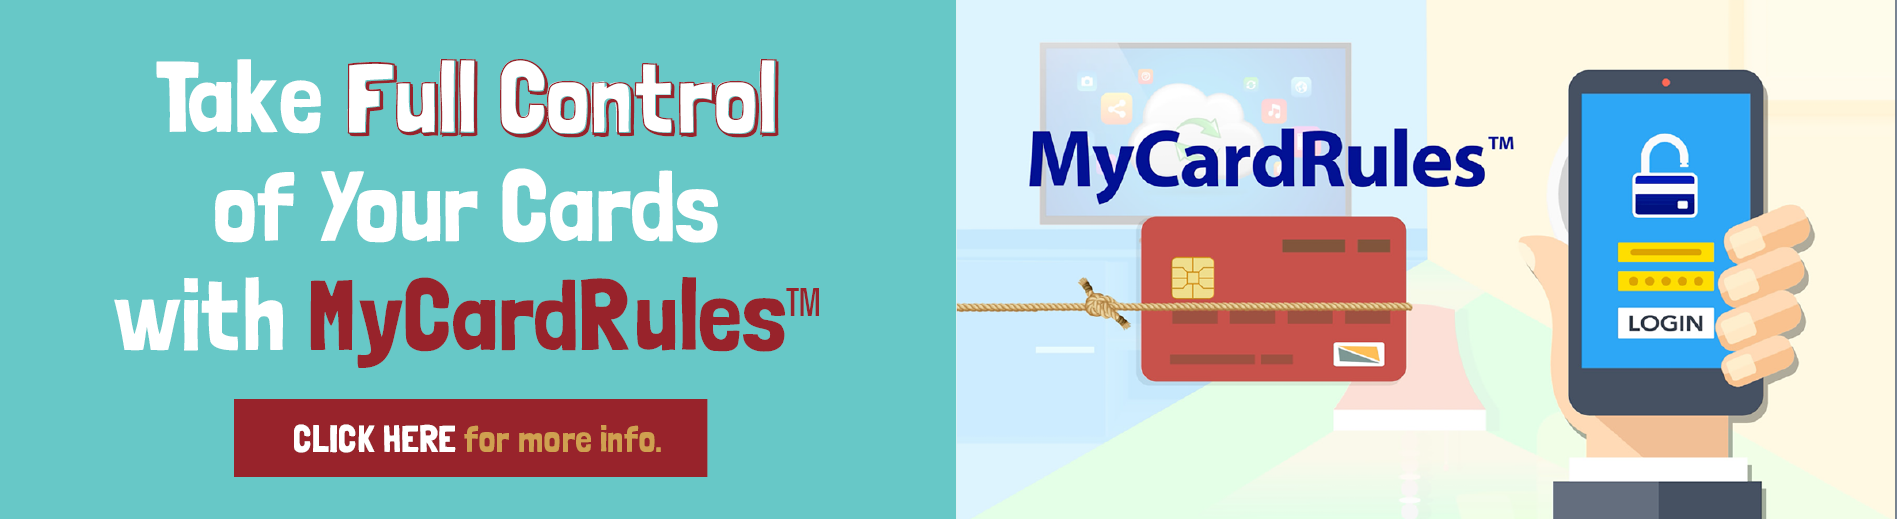 Take full control of your cards with MyCardRules.  Click for more information.